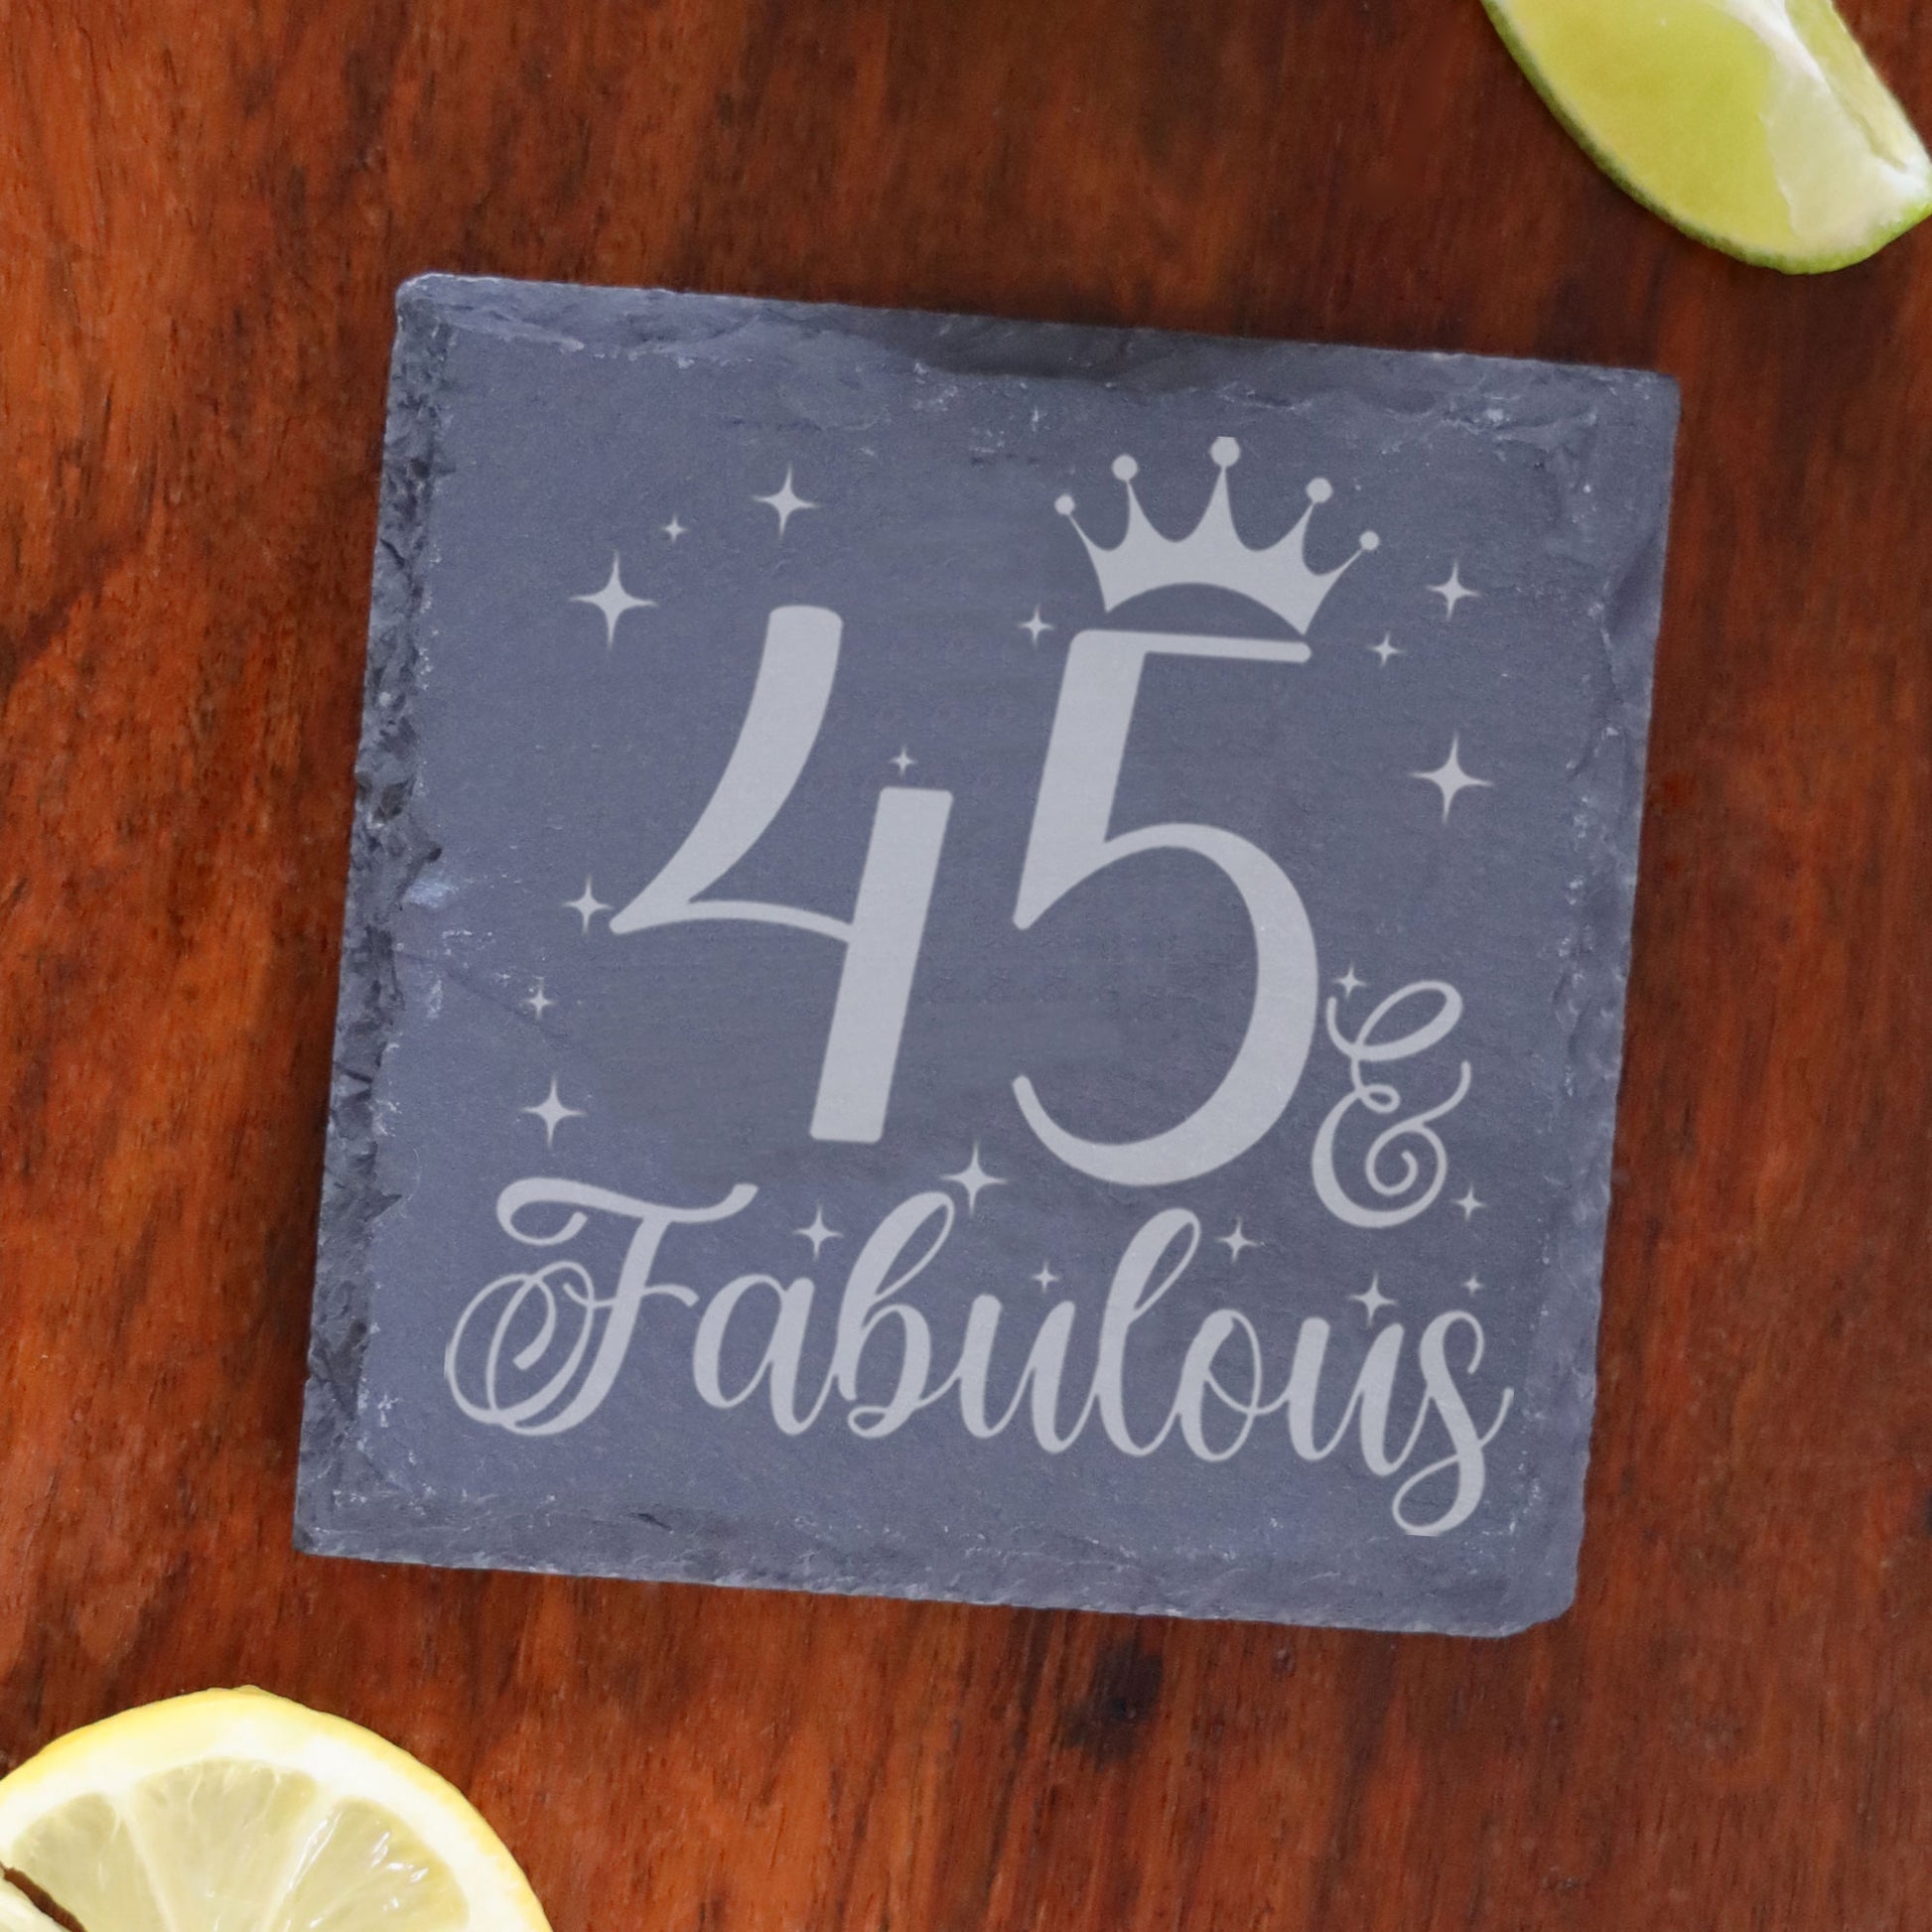 45 & Fabulous 45th Birthday Gift Engraved Wine Glass and/or Coaster Set  - Always Looking Good - Square Coaster Only  